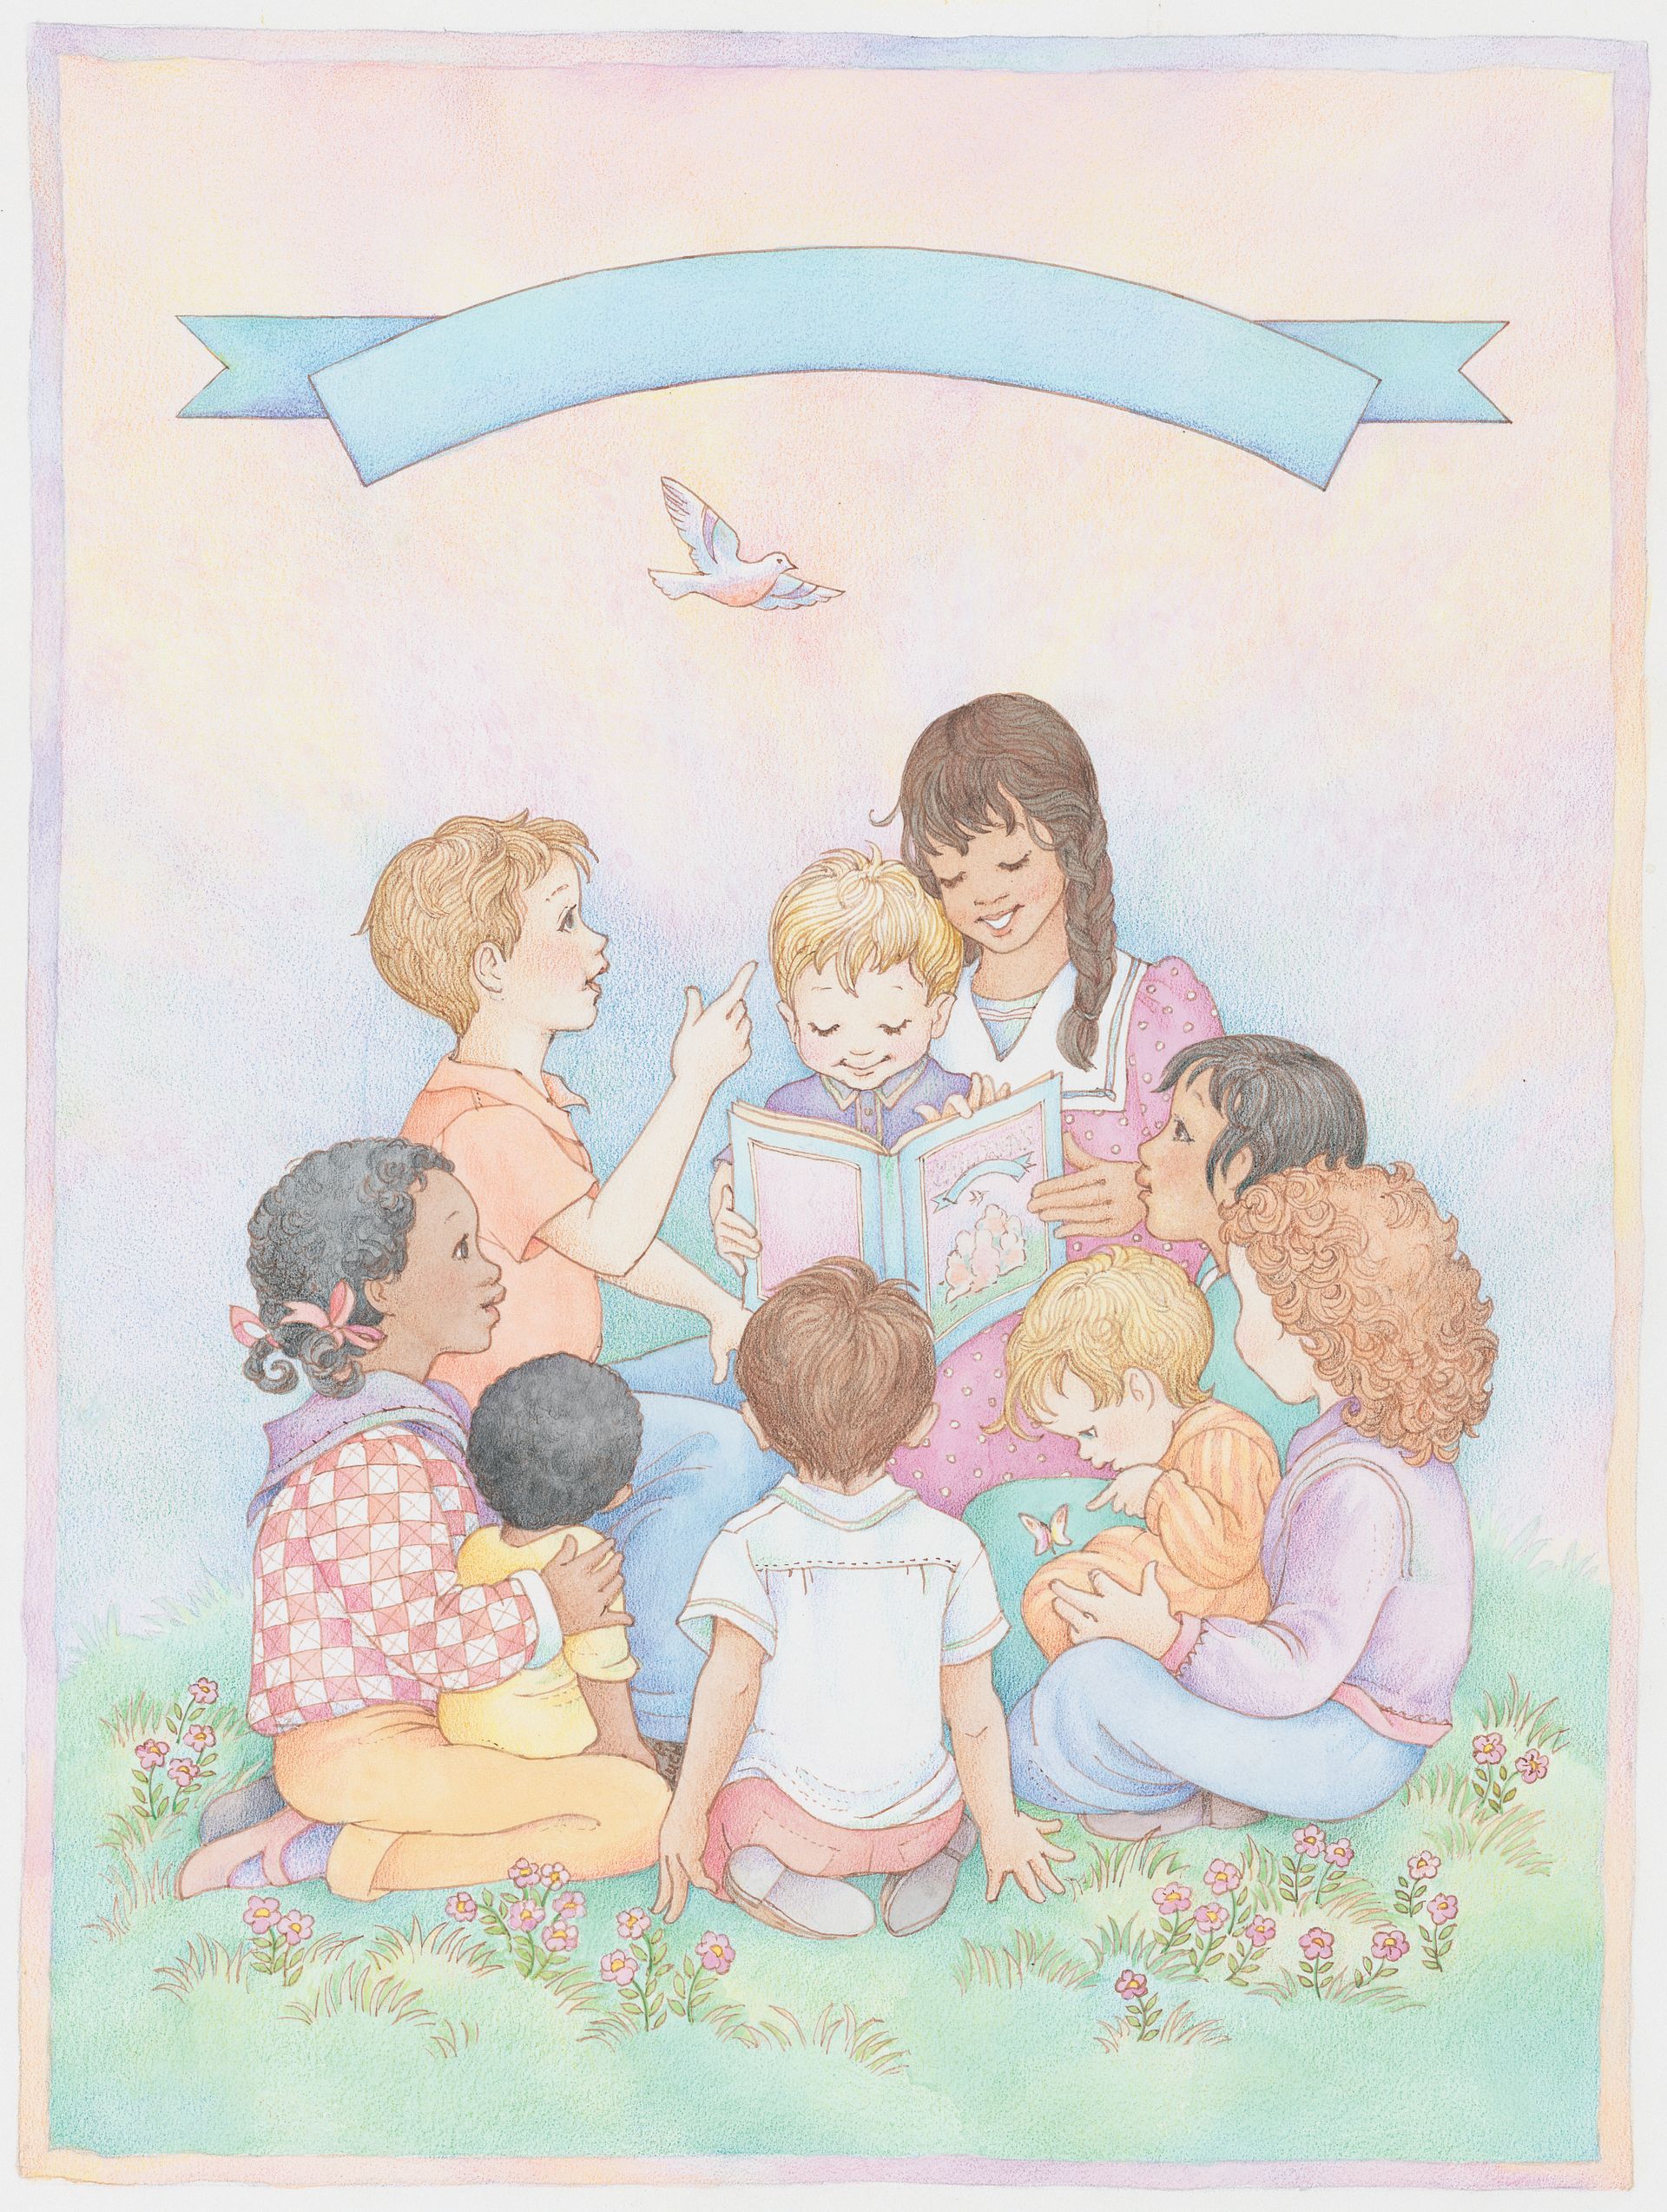 A group of children looking through the Children’s Songbook with their Primary teacher. Found on the cover of the Children’s Songbook; watercolor illustration by Phyllis Luch.